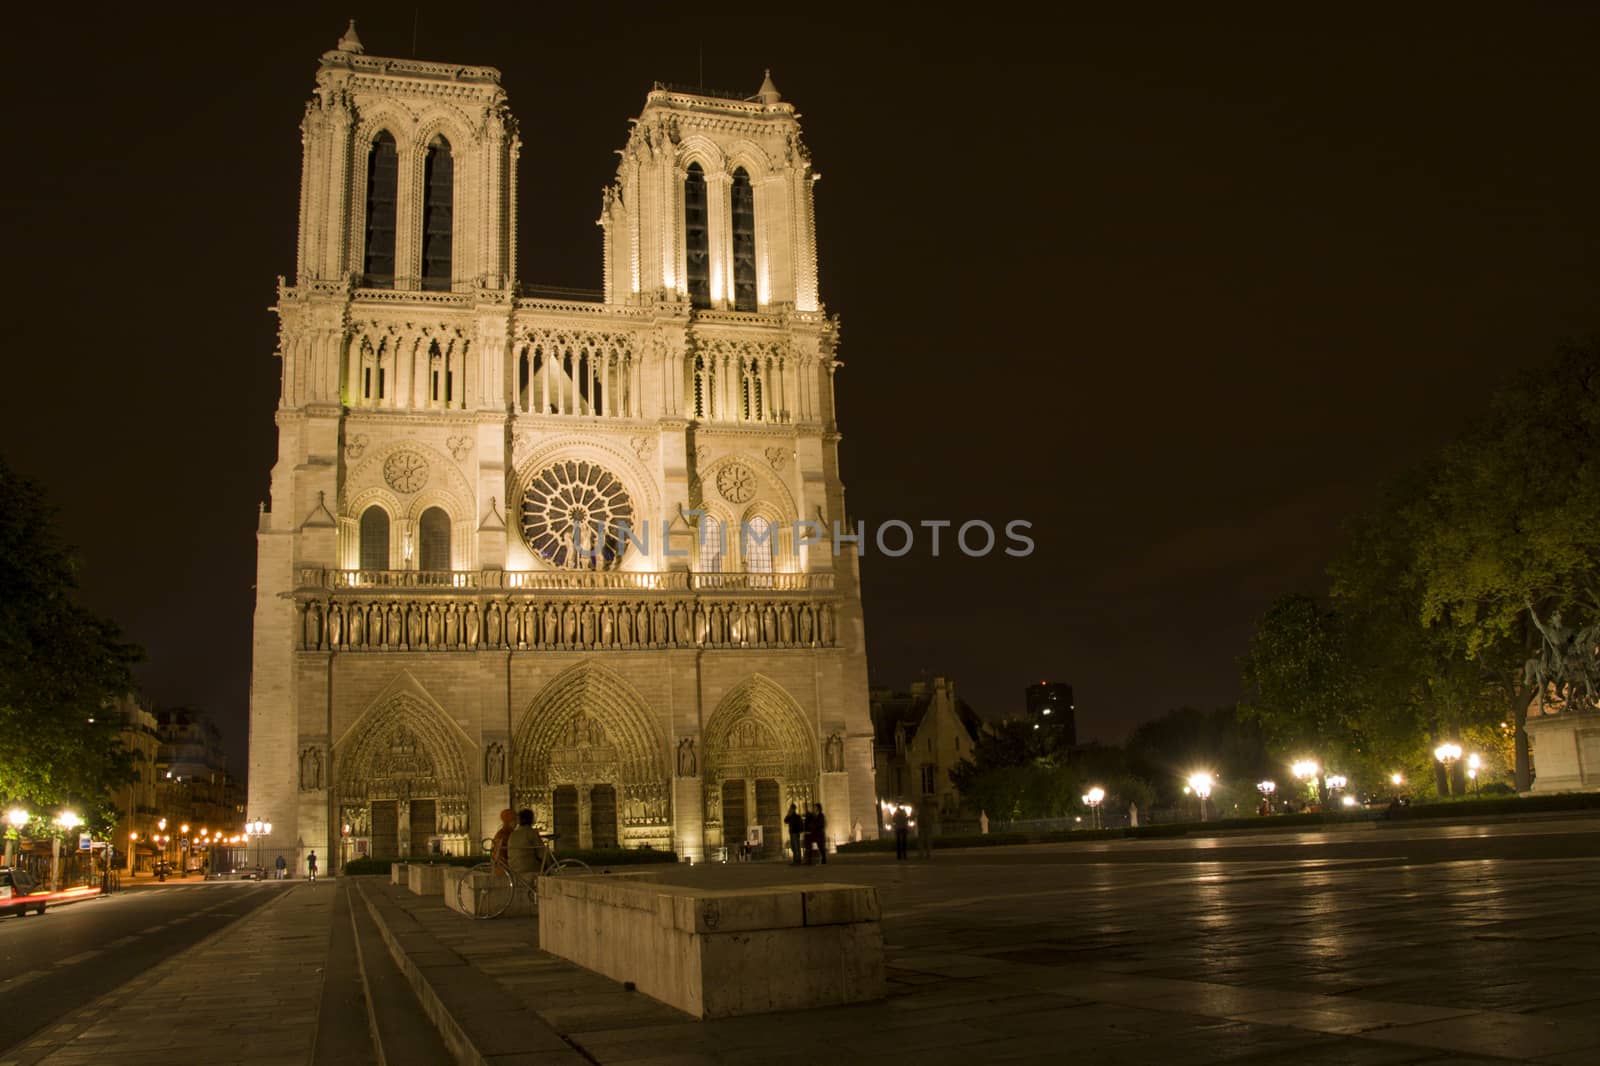 Notre dame at night in Paris by tanaonte